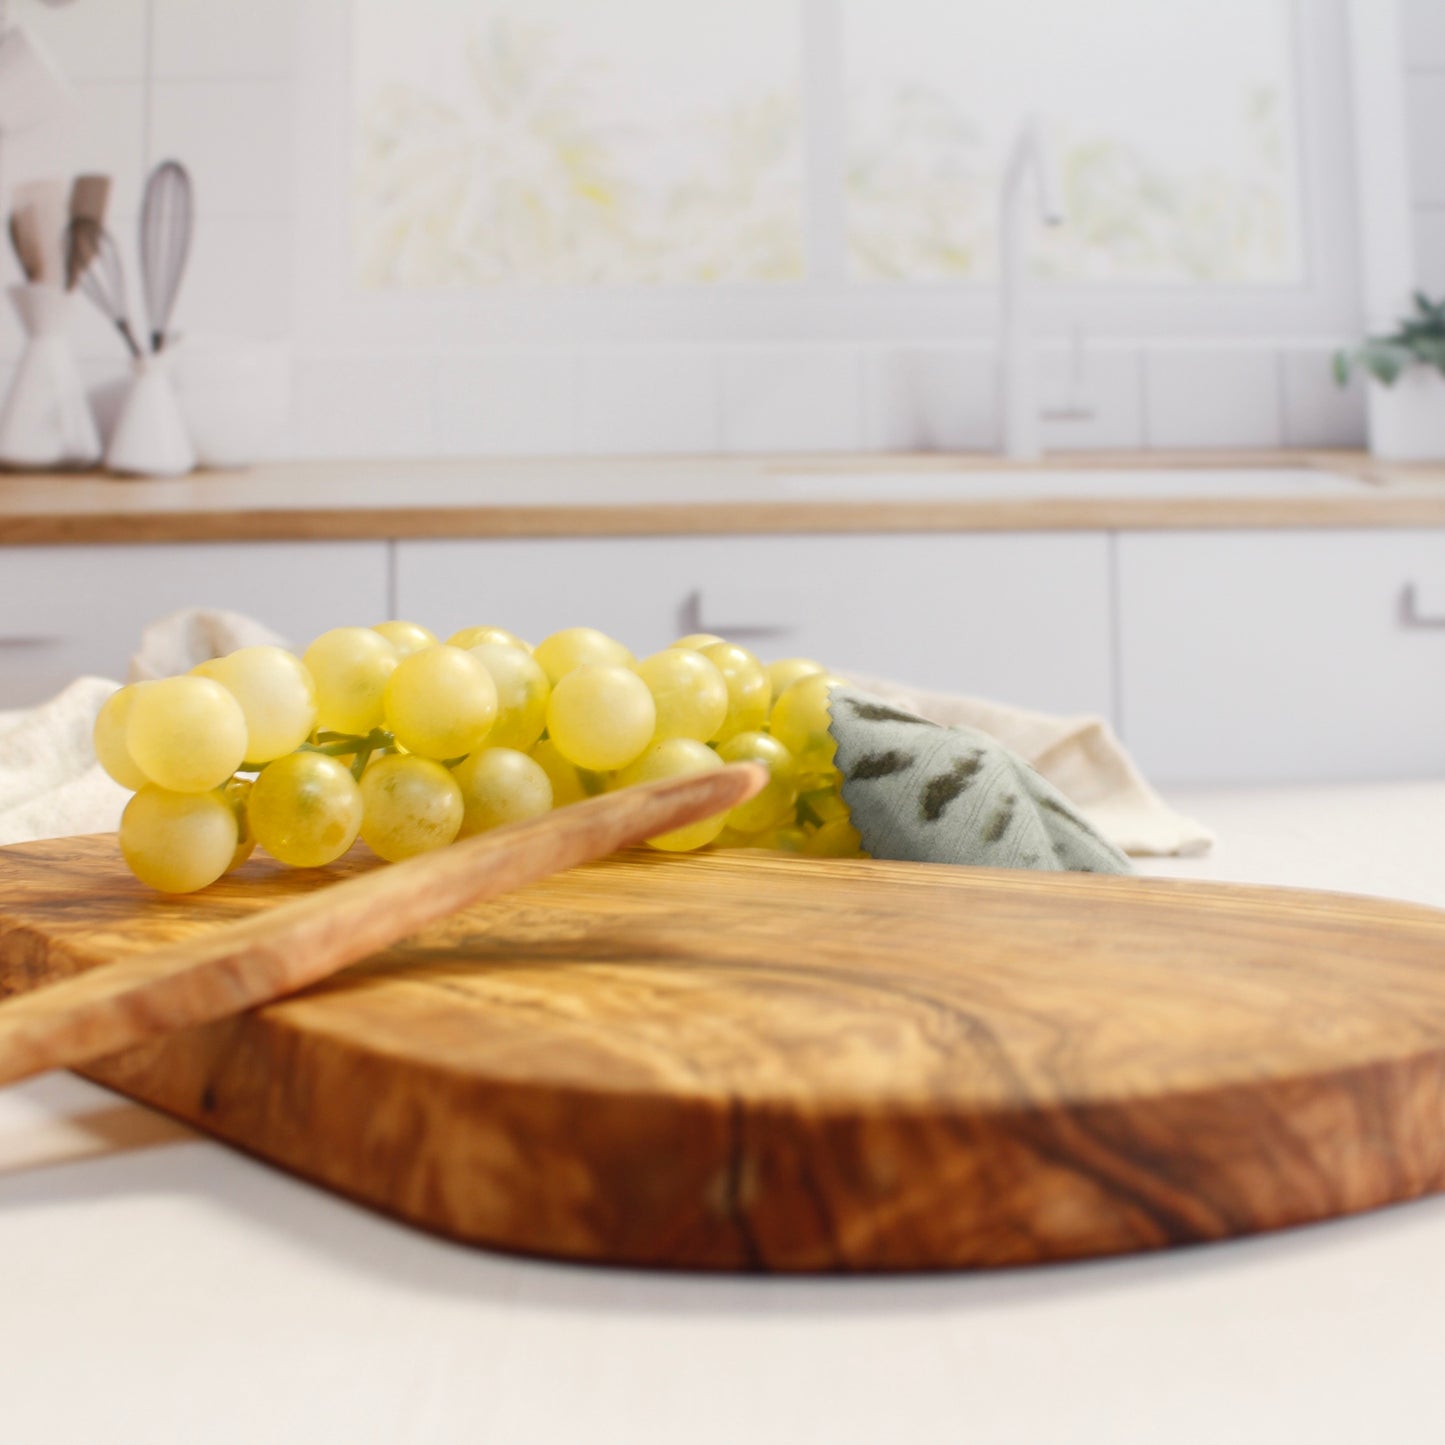 OLIVE WOOD - ENGRAVED SERVING/CUTTING/CHARCUTERIE BOARD